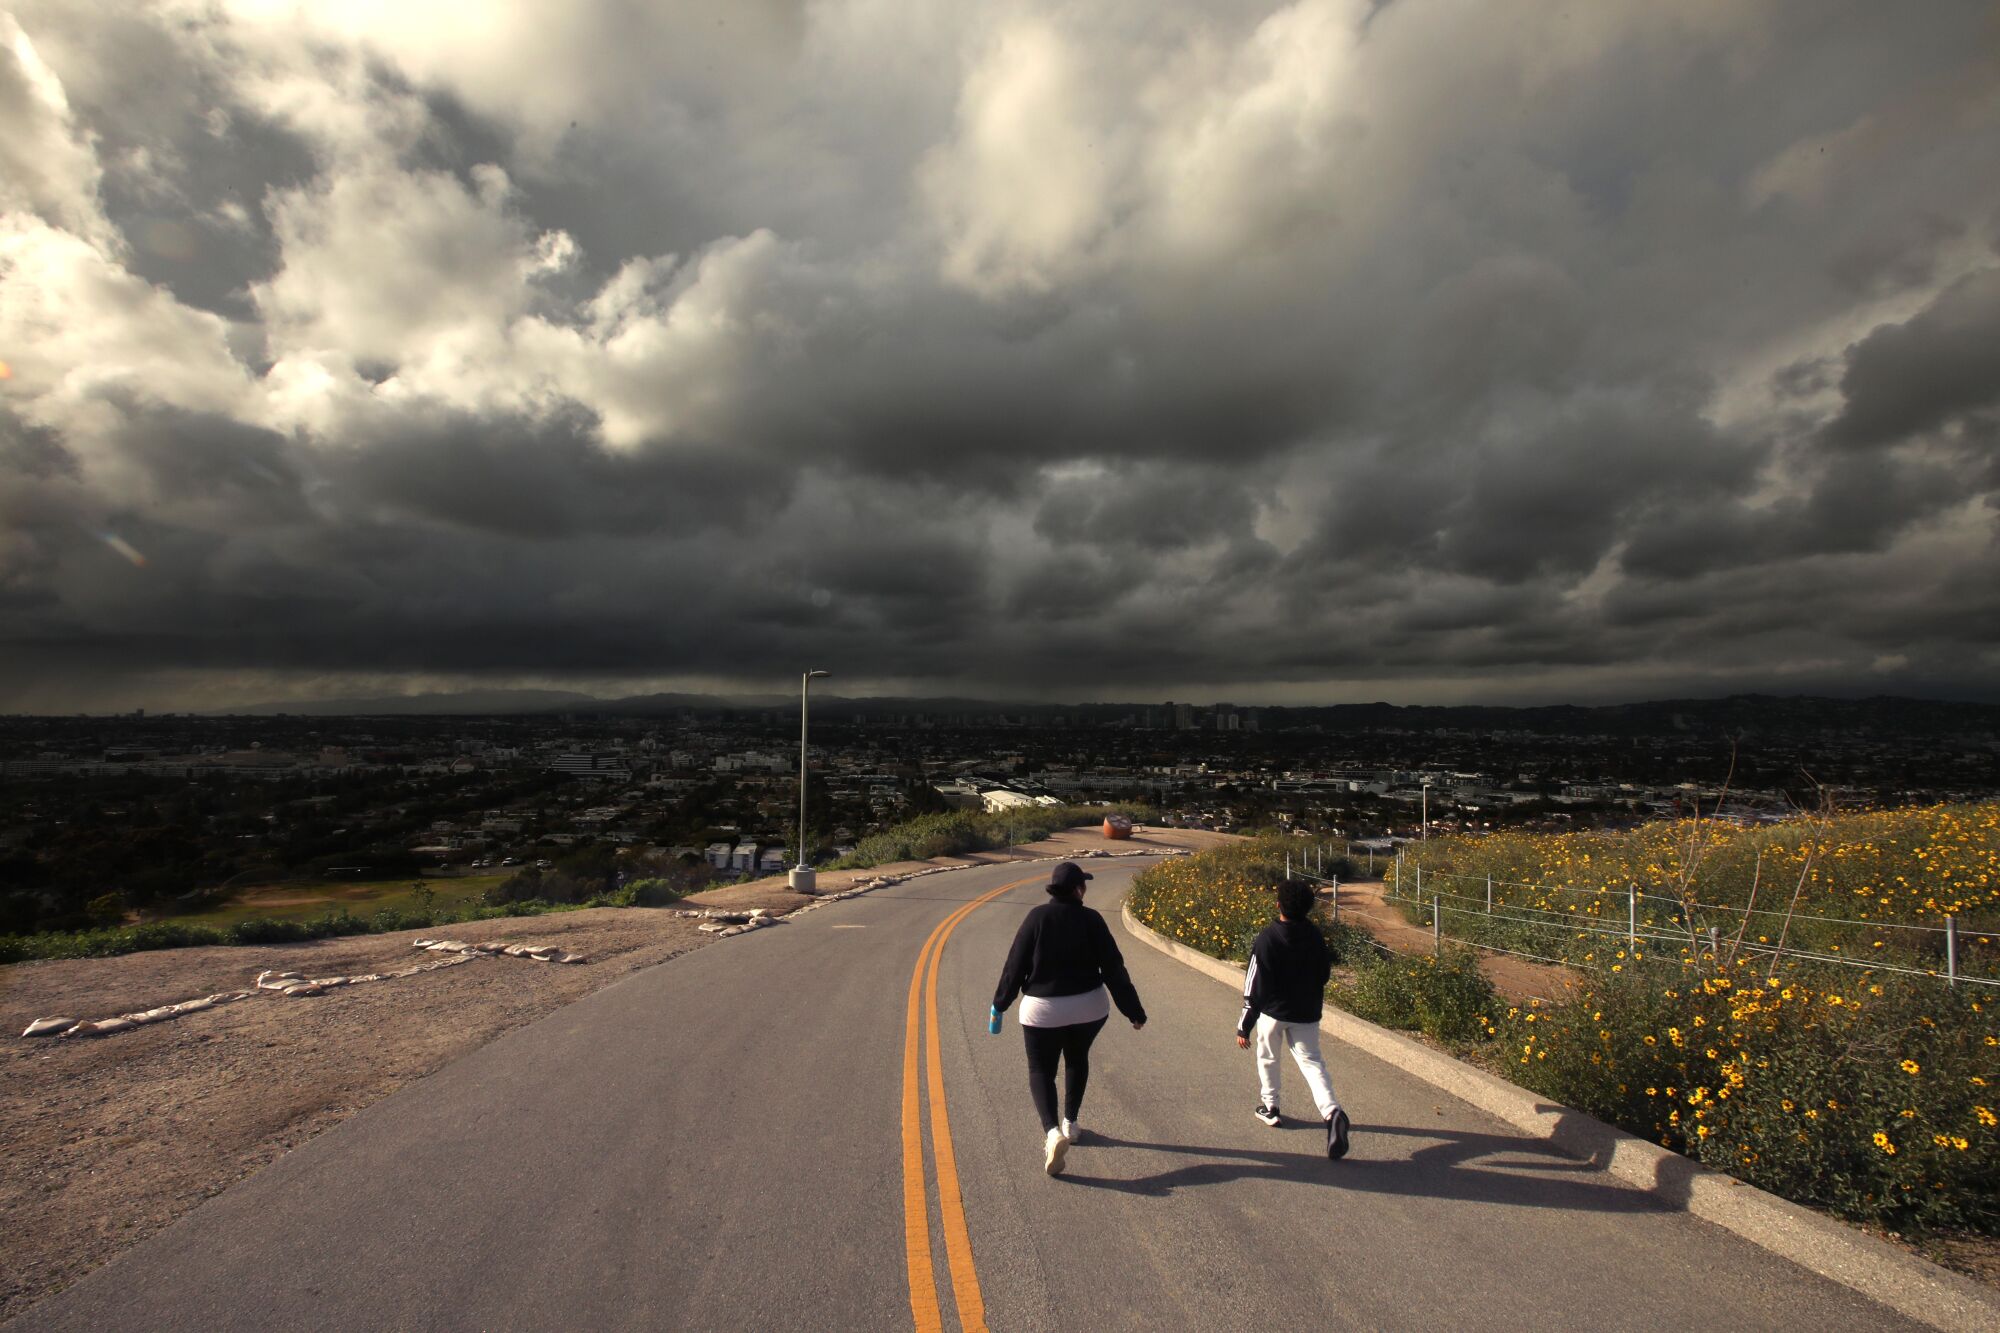 Walking down a two-way street, a pair of walkers make their way toward the darkness of rain clouds 